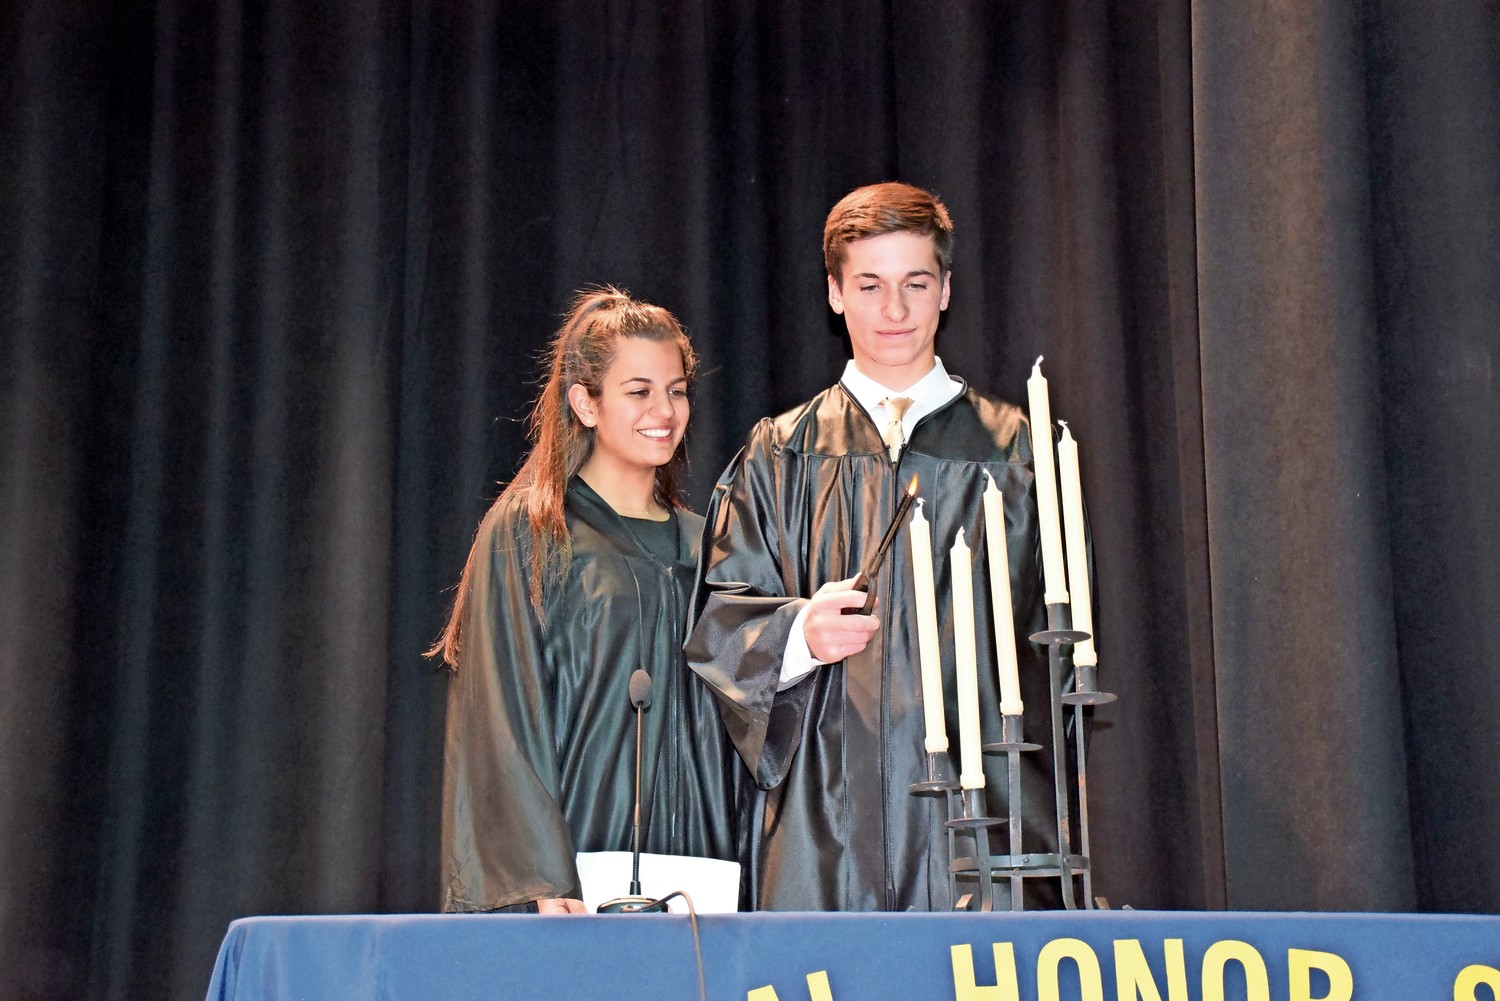 National Honor Society Corresponding Secretary Brianna Legovich and trustee Ryan McCarty lit the ceremonial candles during the induction ceremony.